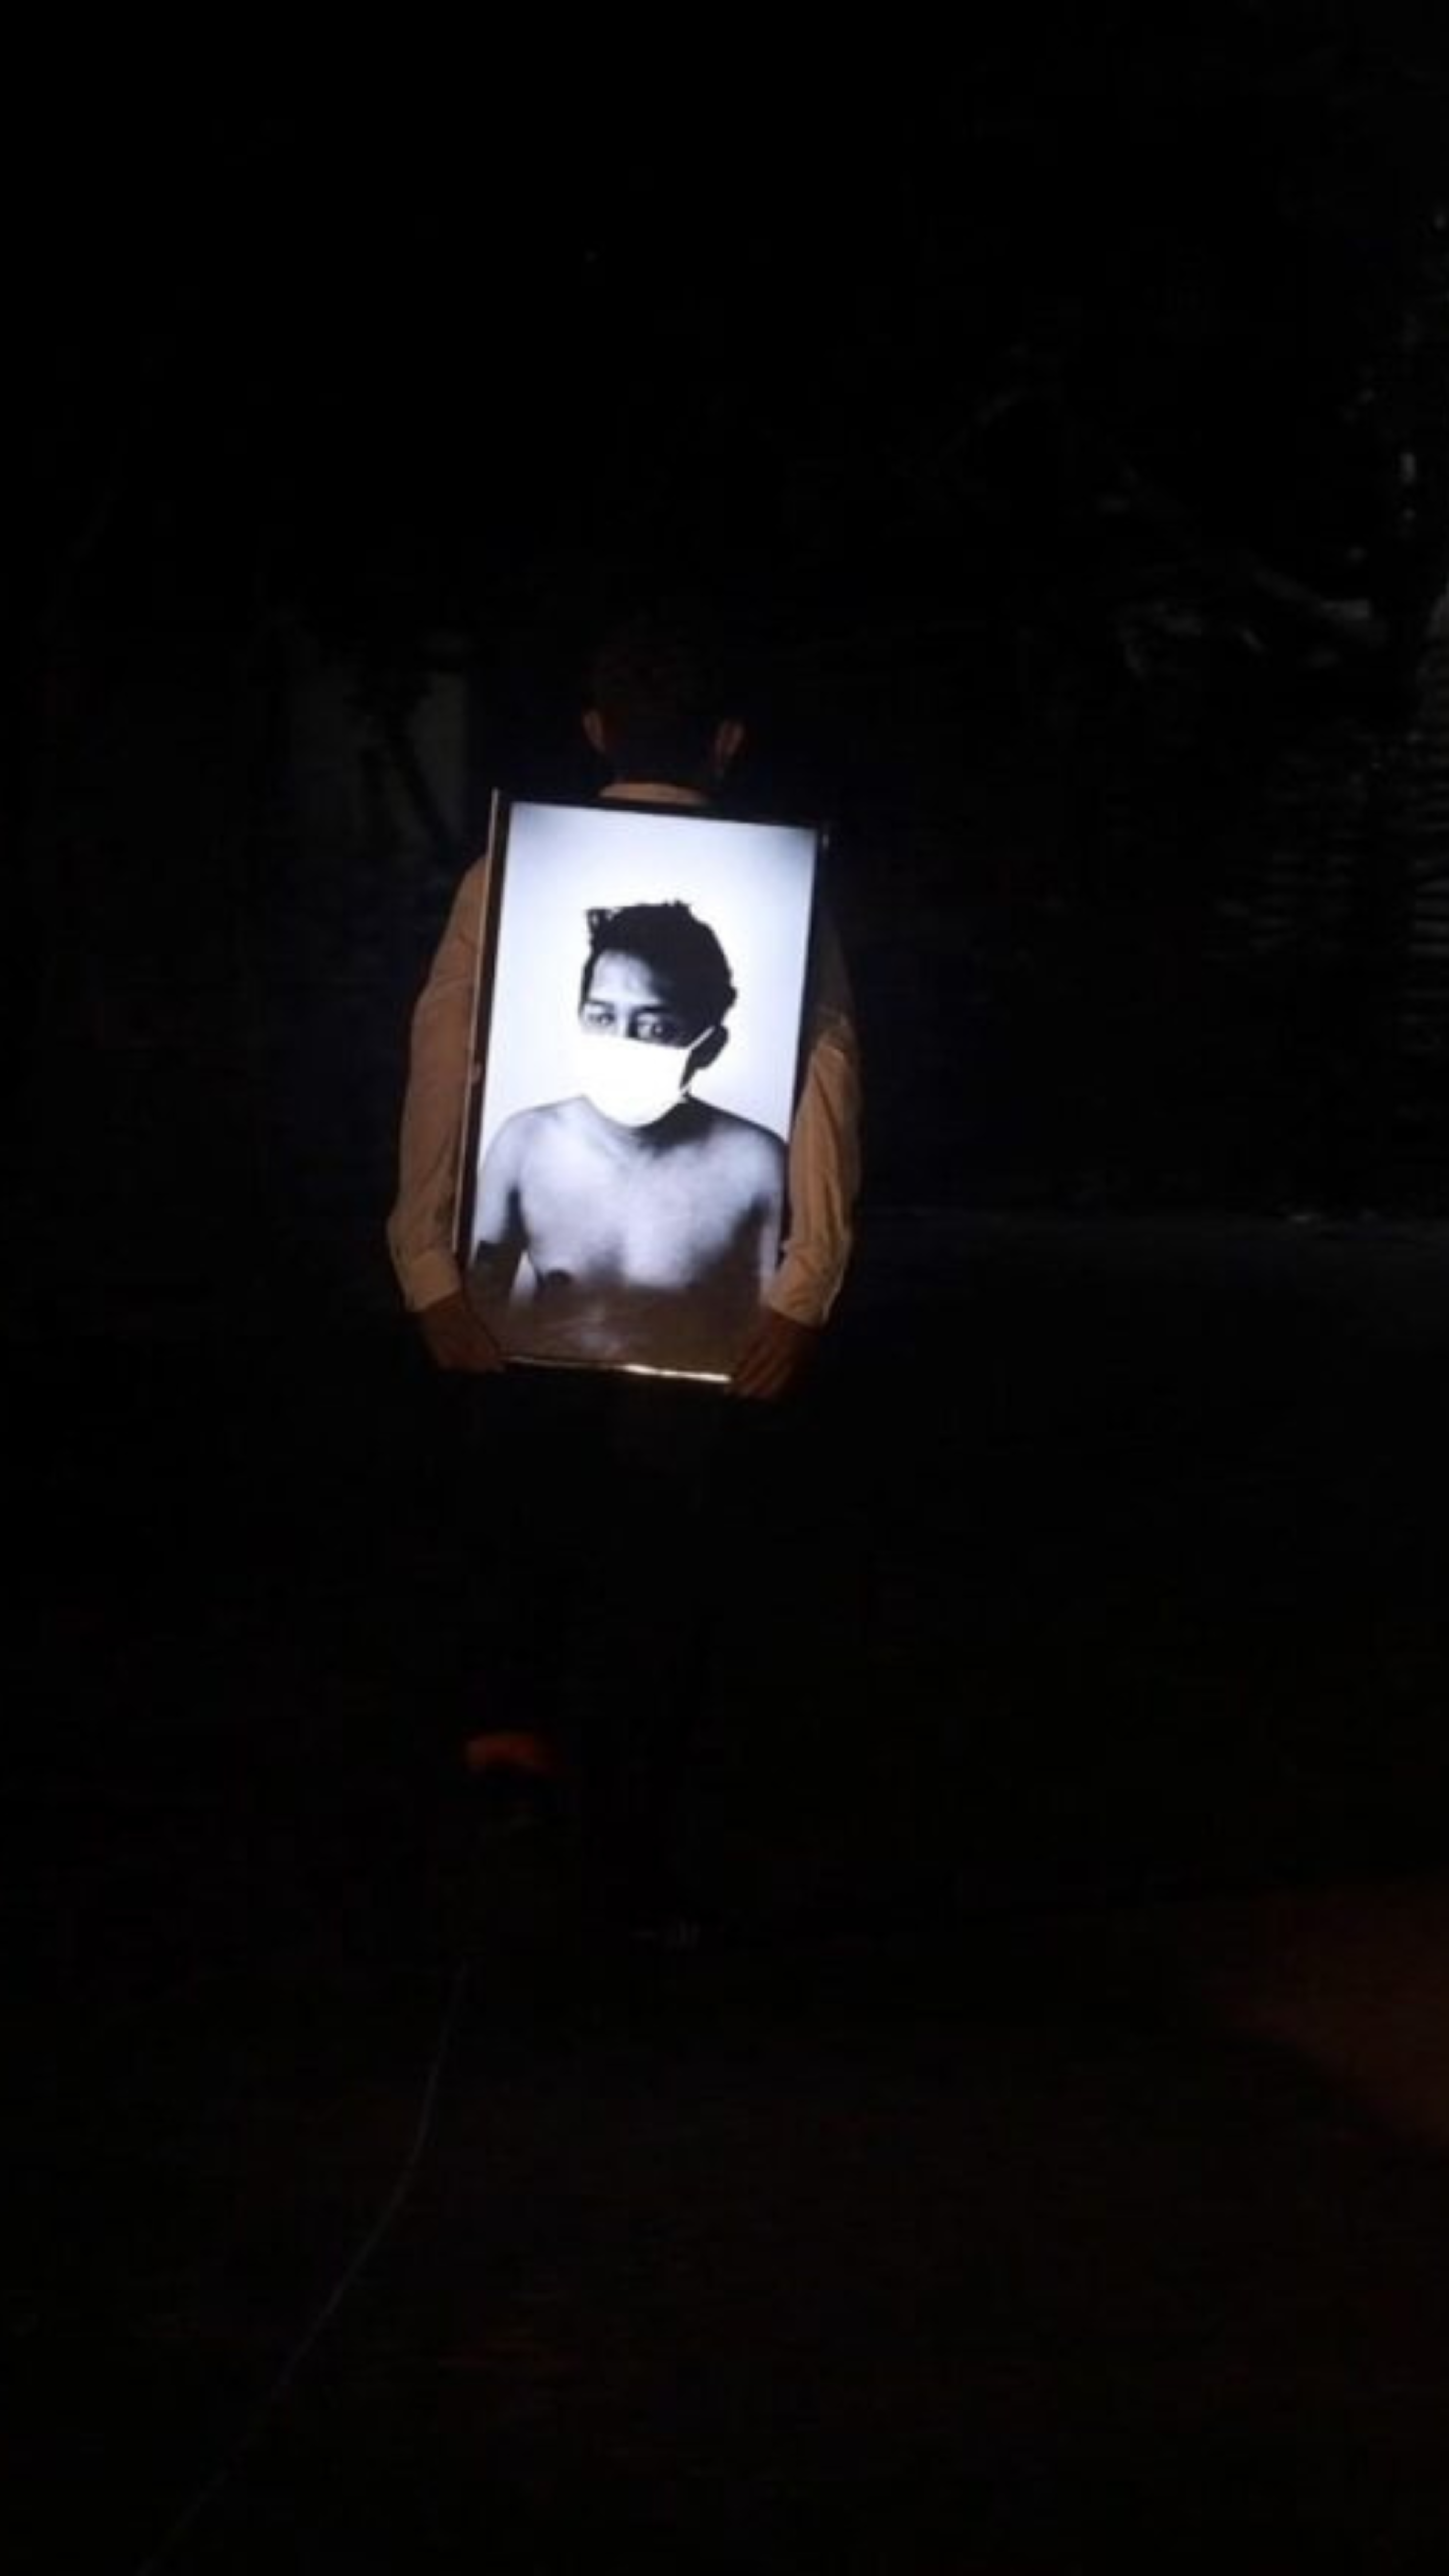 A person holding a backlit framed portrait in the dark.